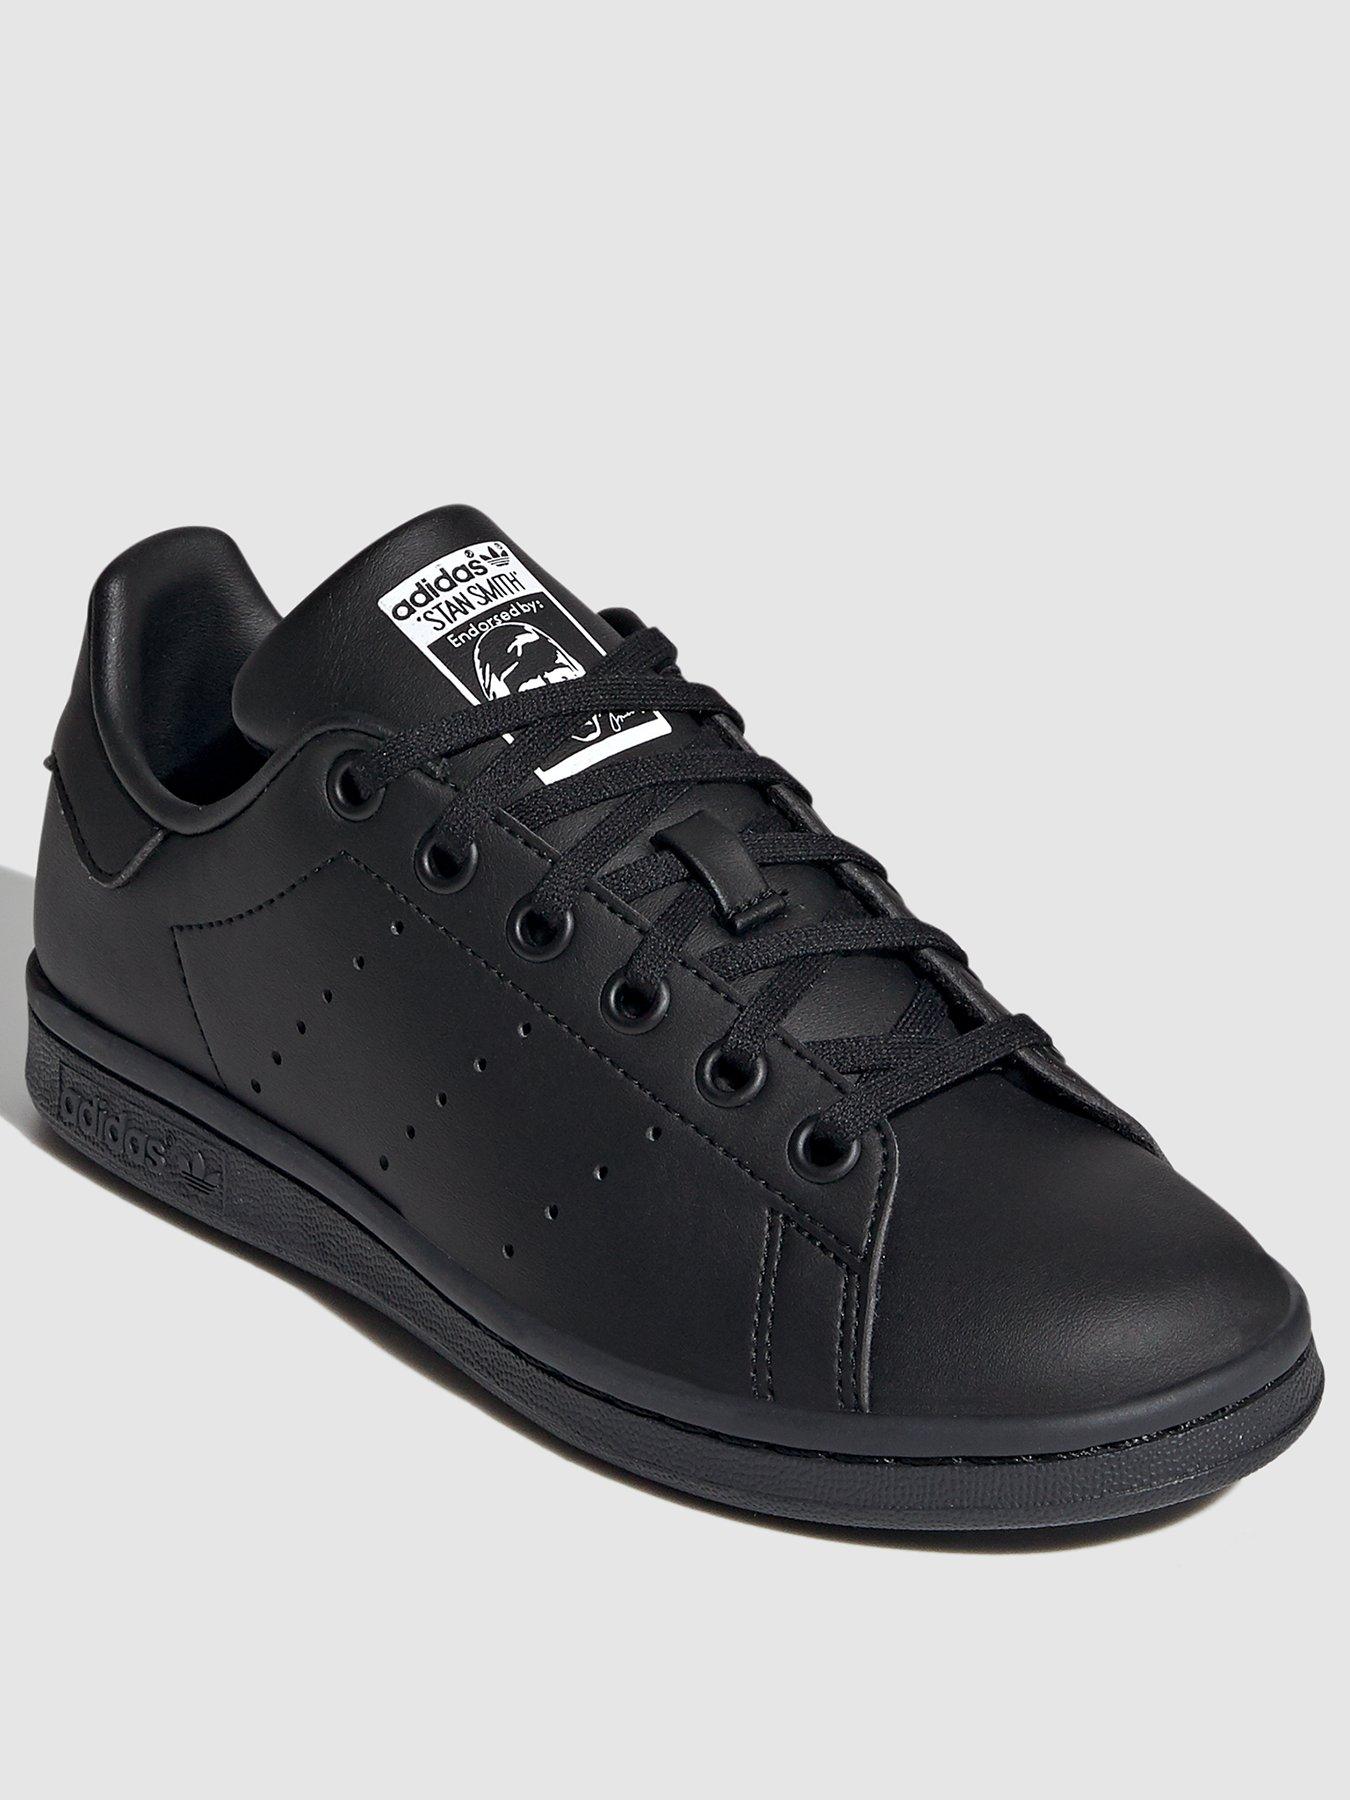 Liverpool FC Stan Smith Shoes